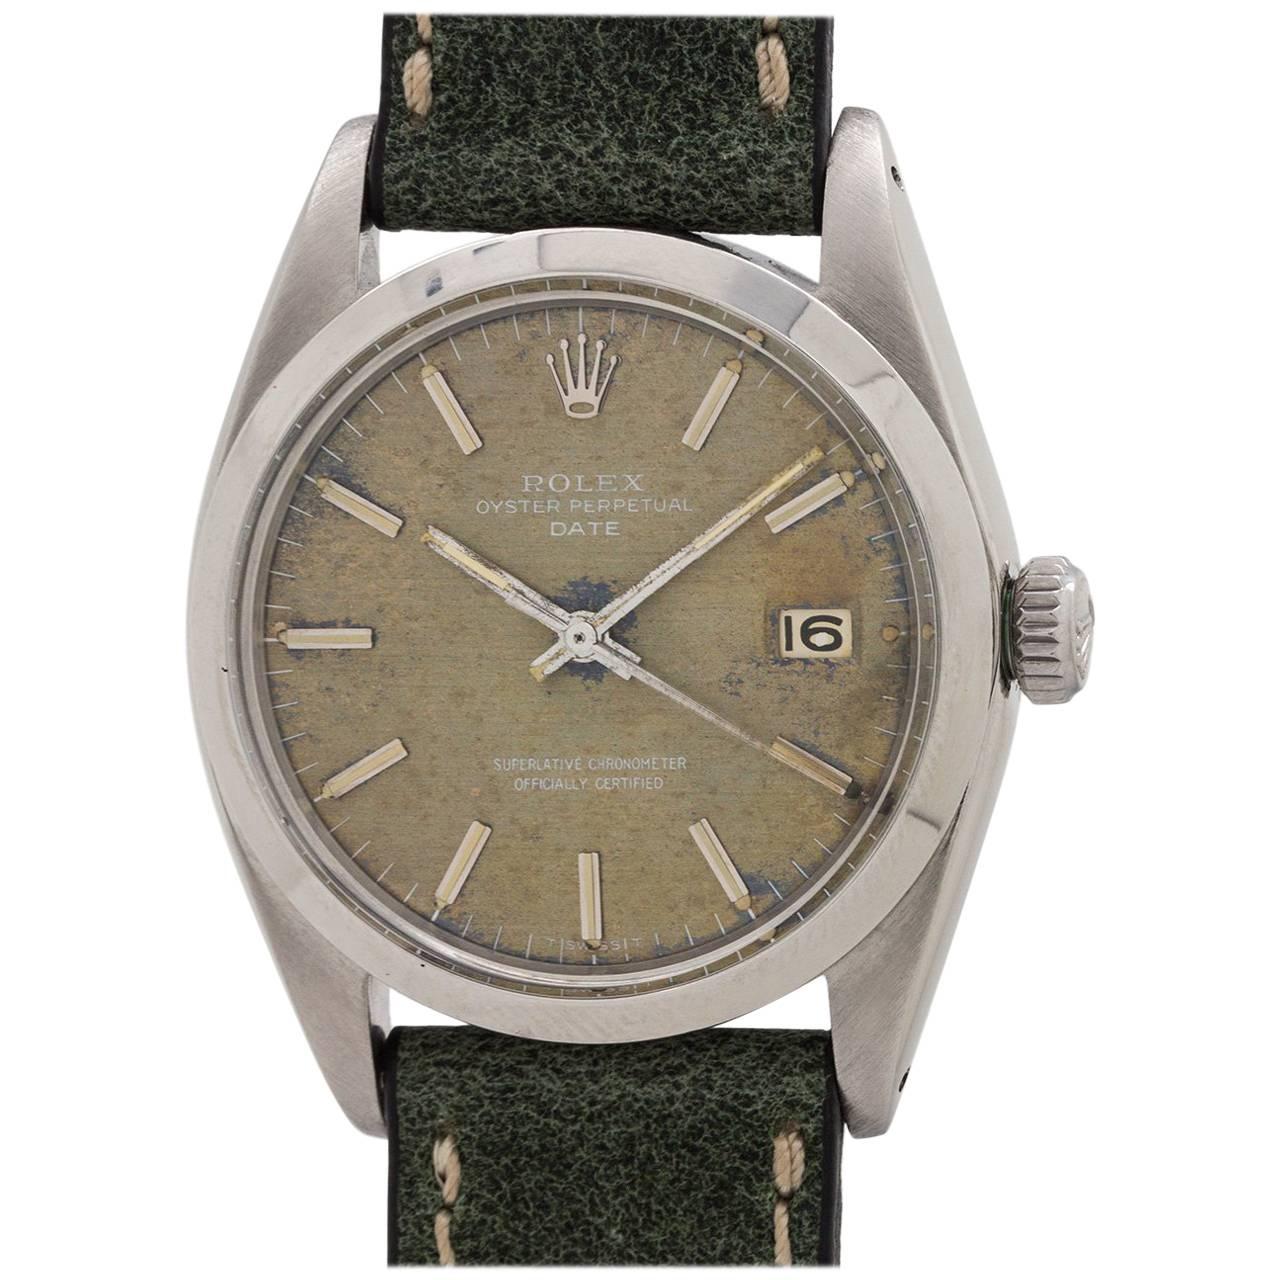 Rolex Stainless Steel Oyster Perpetual Date Self Winding Wristwatch, circa 1966